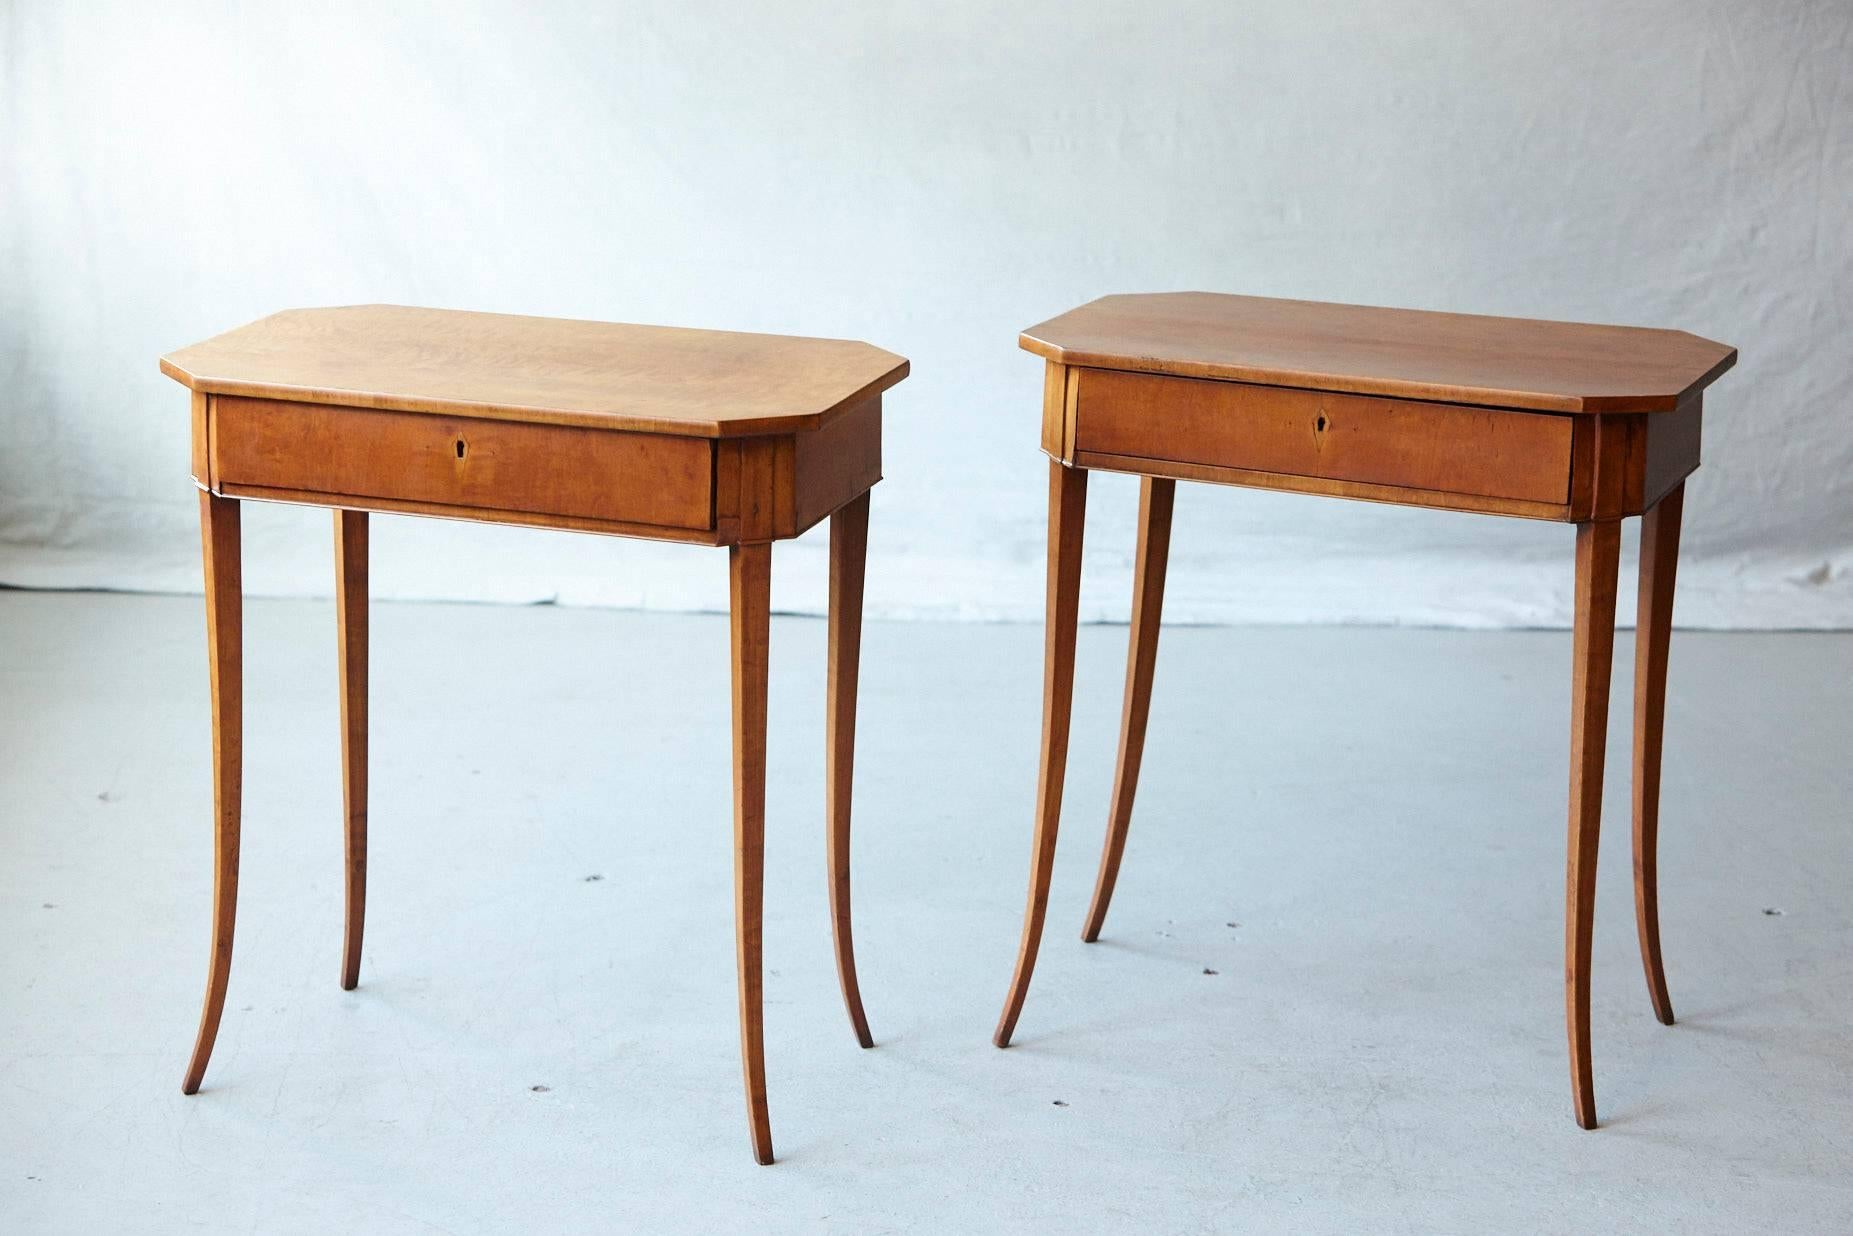 Beautiful pair of light and airy Biedermeier side tables with elegant sabre legs, single drawer and maple veneer.  Both tops are slightly bend, please refer to the detailed photos.
Please note the keys for the locks are available, we just forgot to